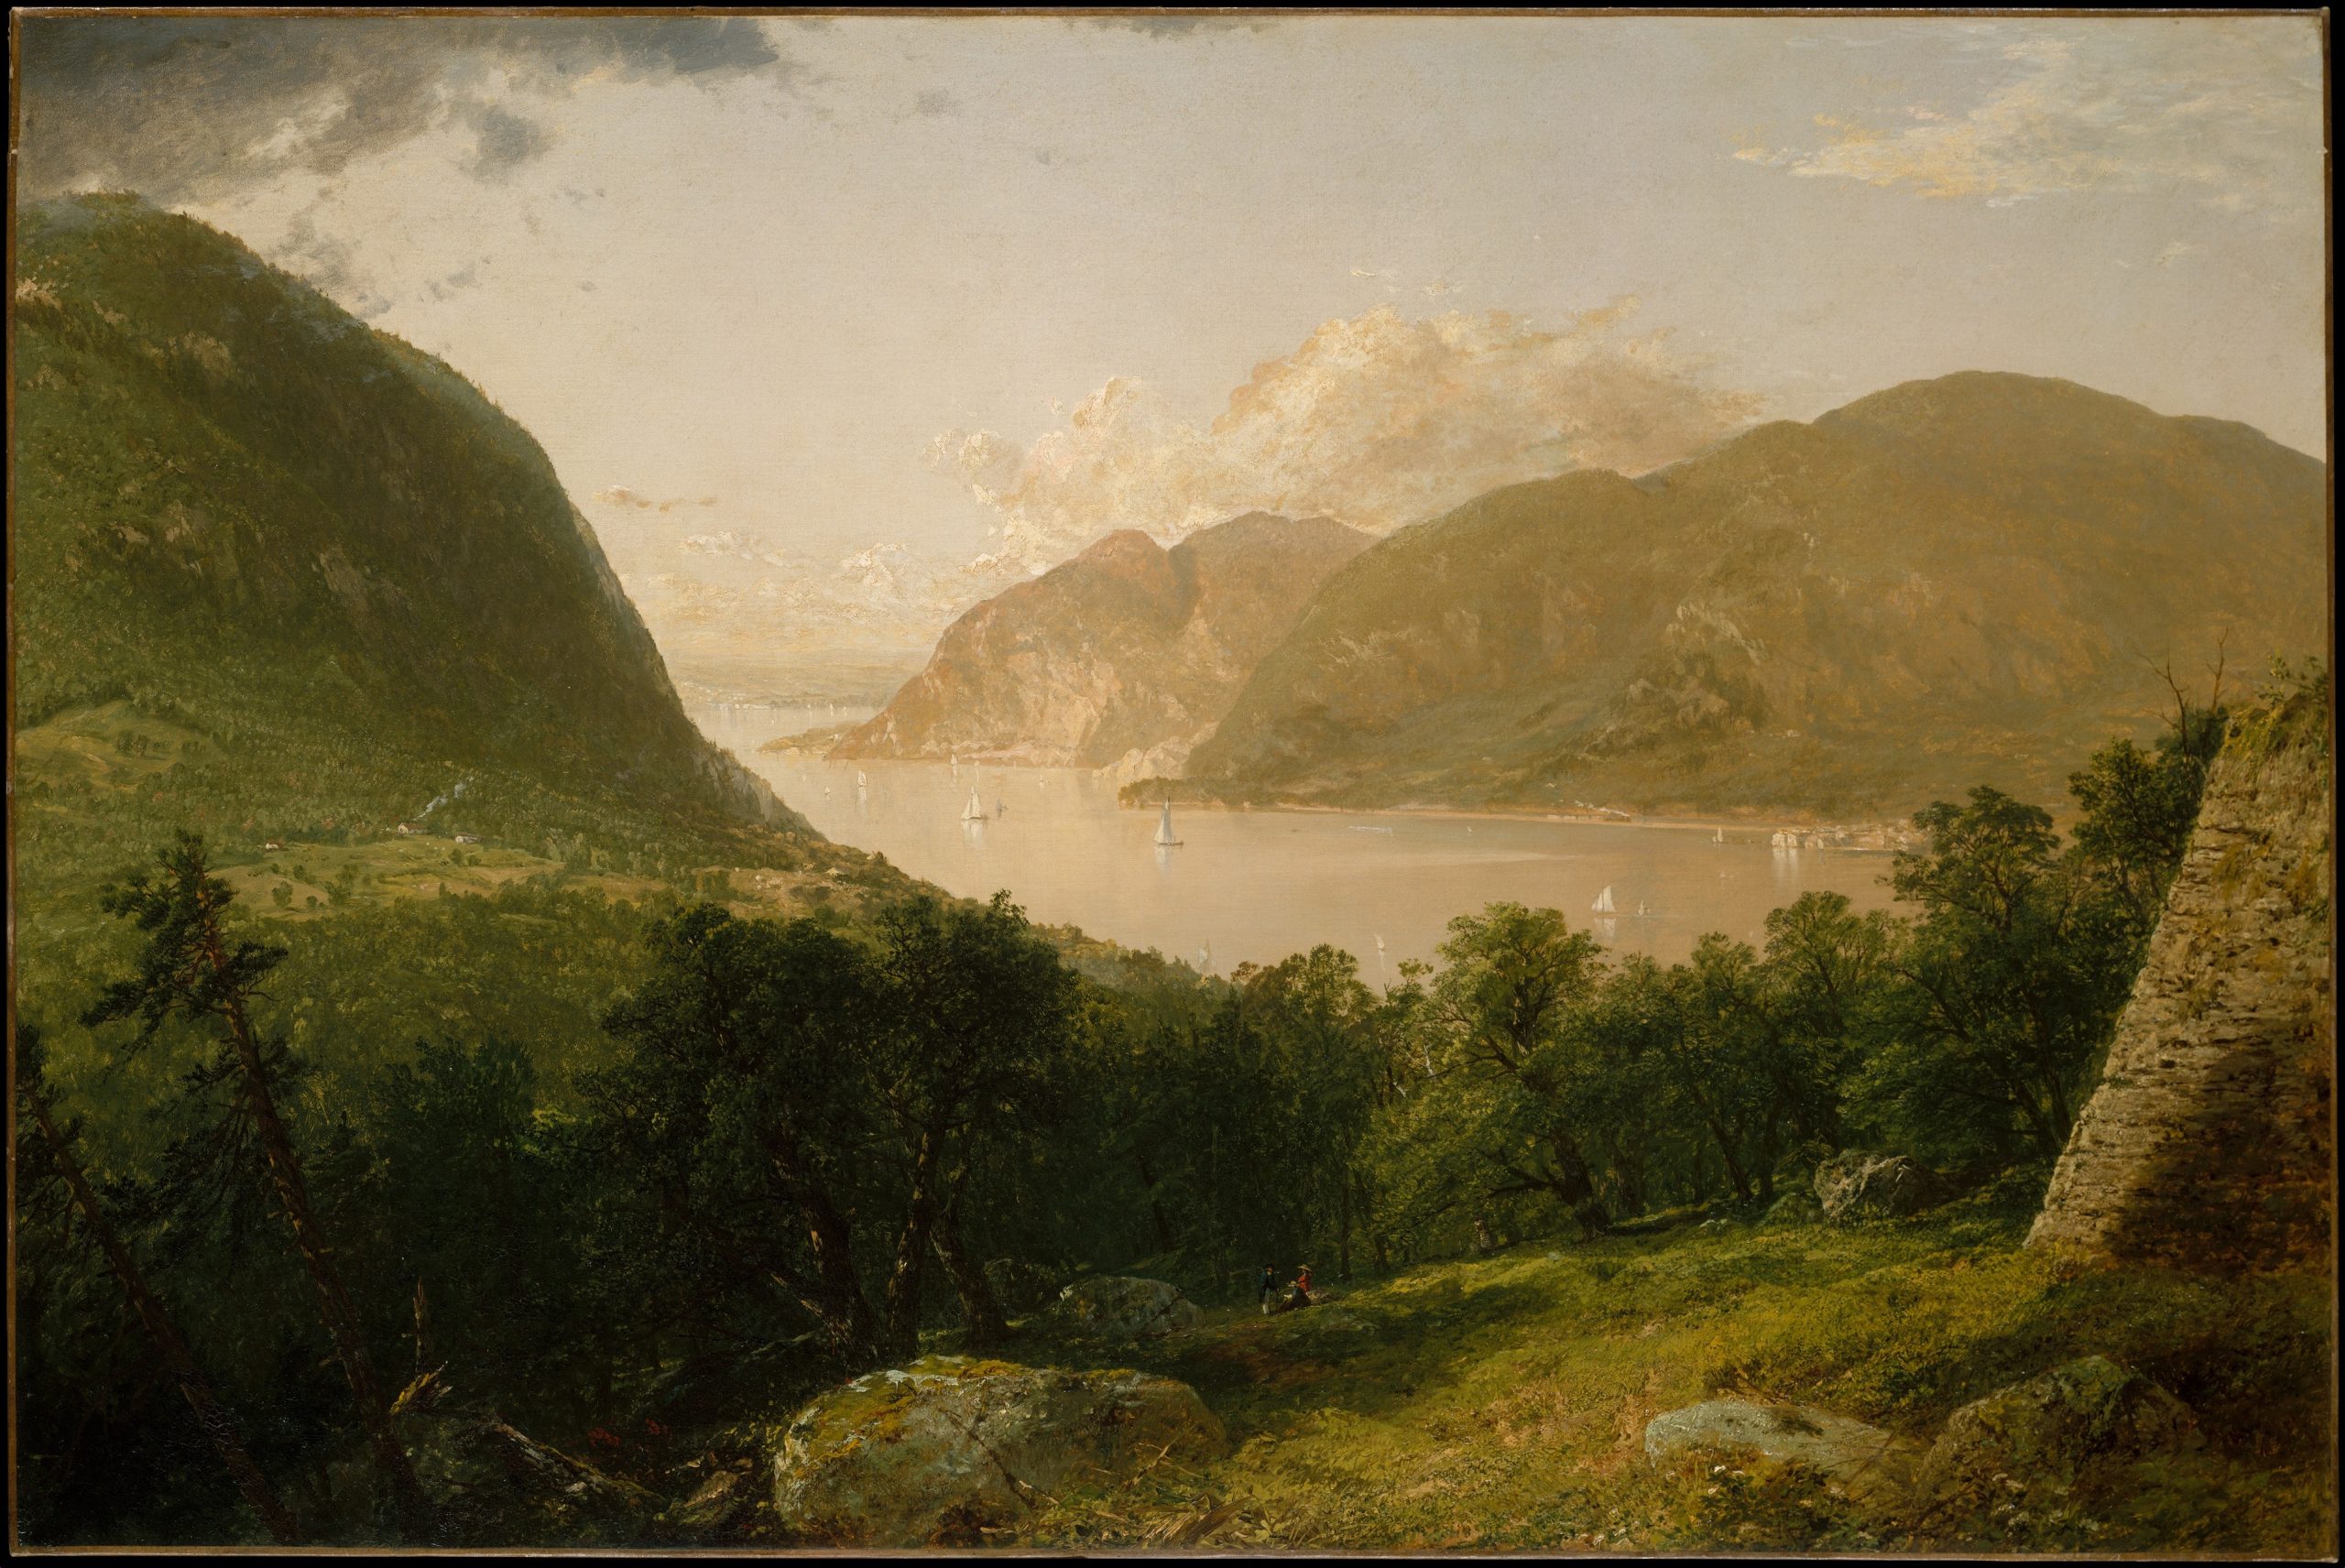 A scene depicting a mountain range full of trees.